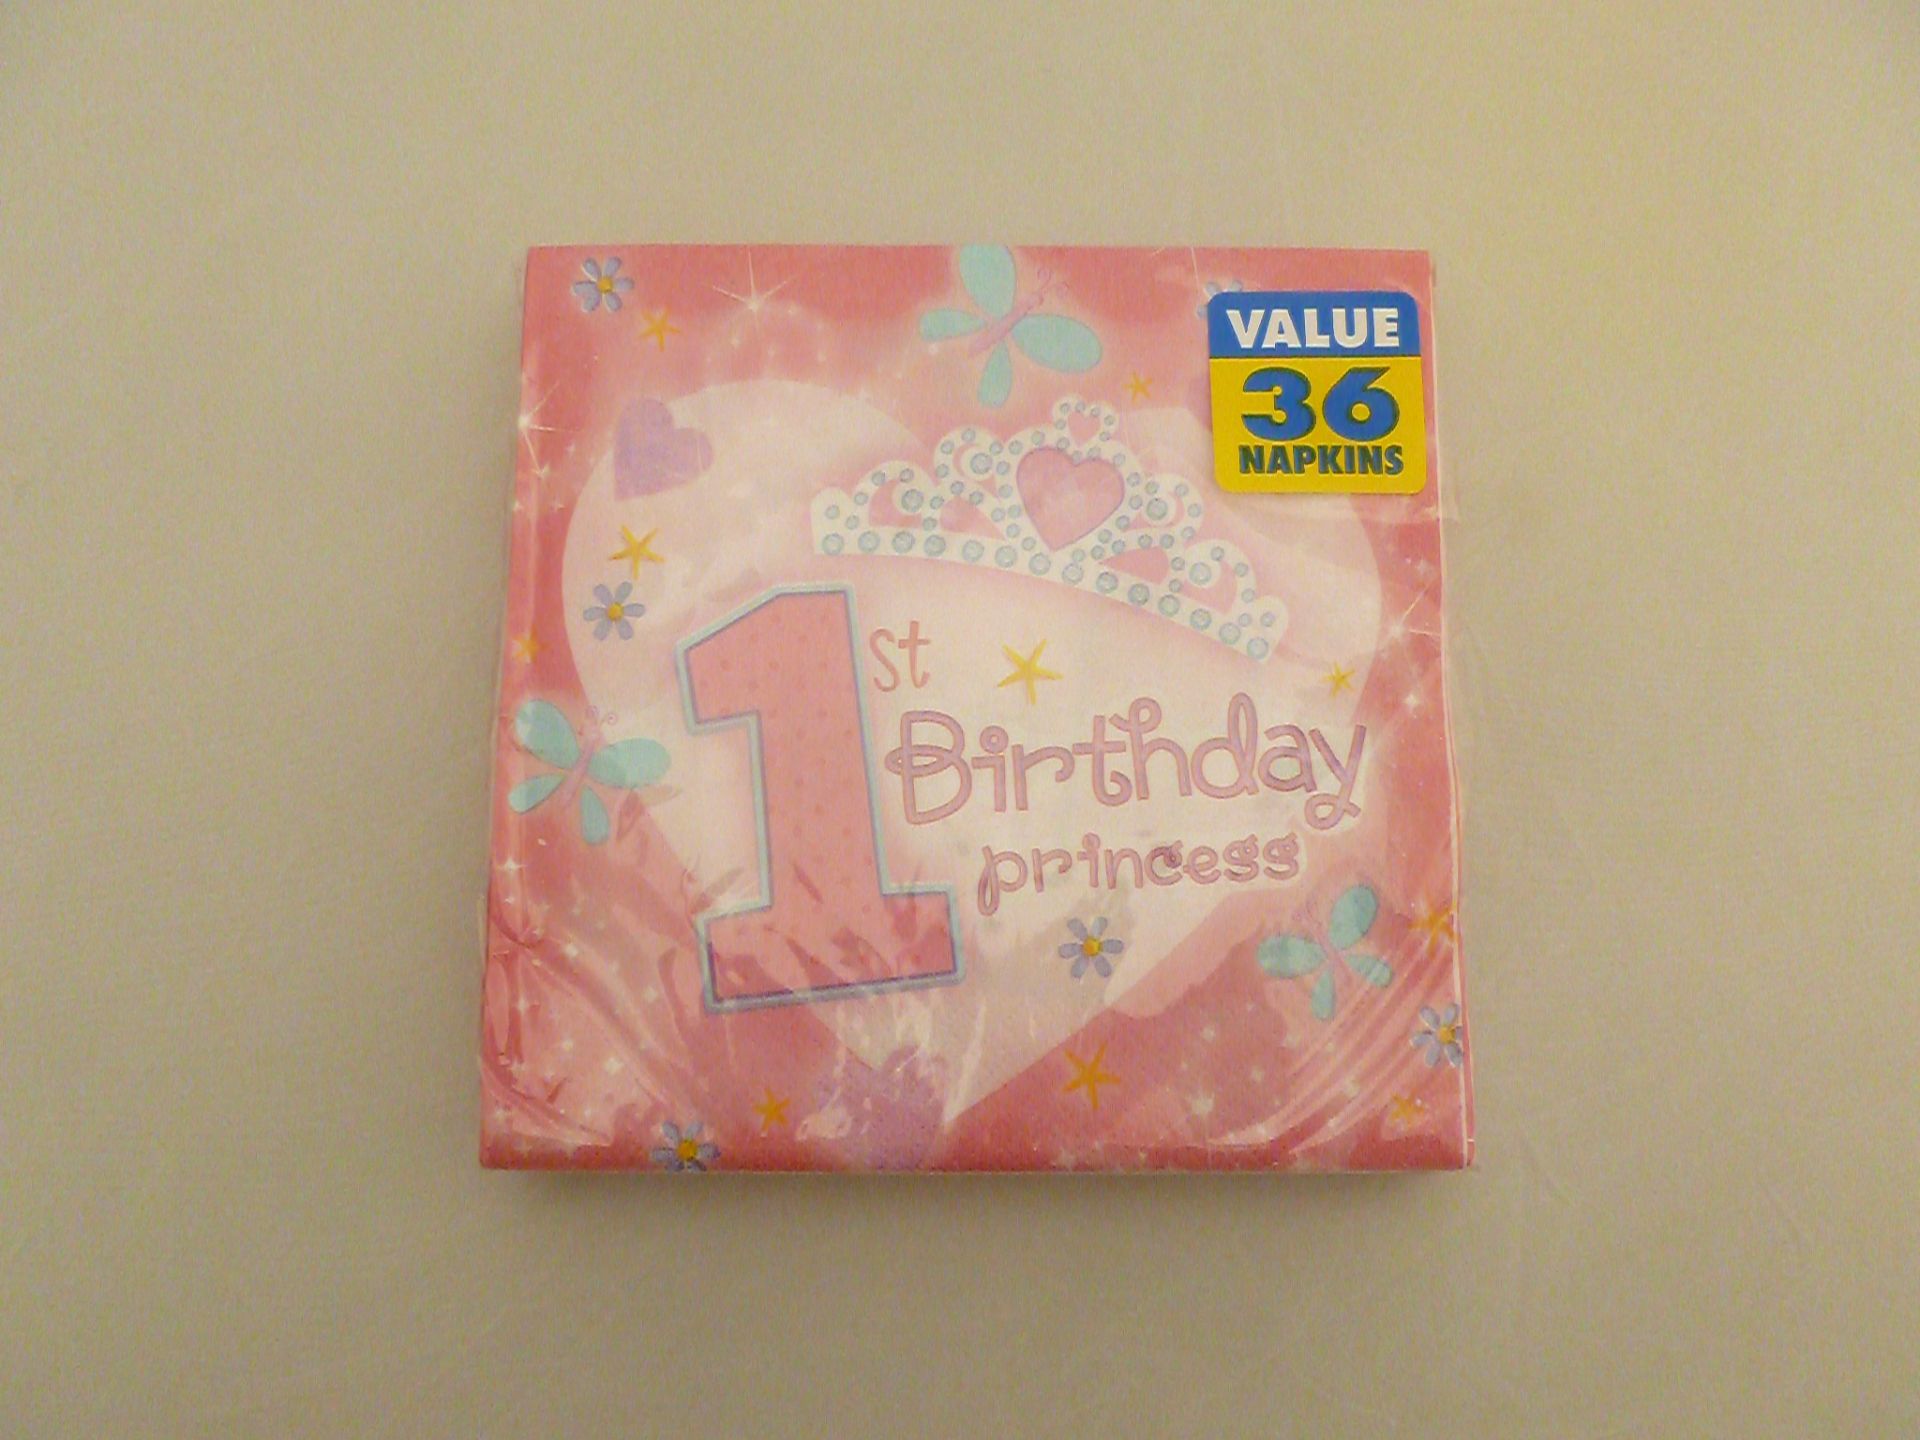 72 packs of 36 1st Birthday Princess Napkins. (32.7 cm x 32.7 cm) New, in original packaging and